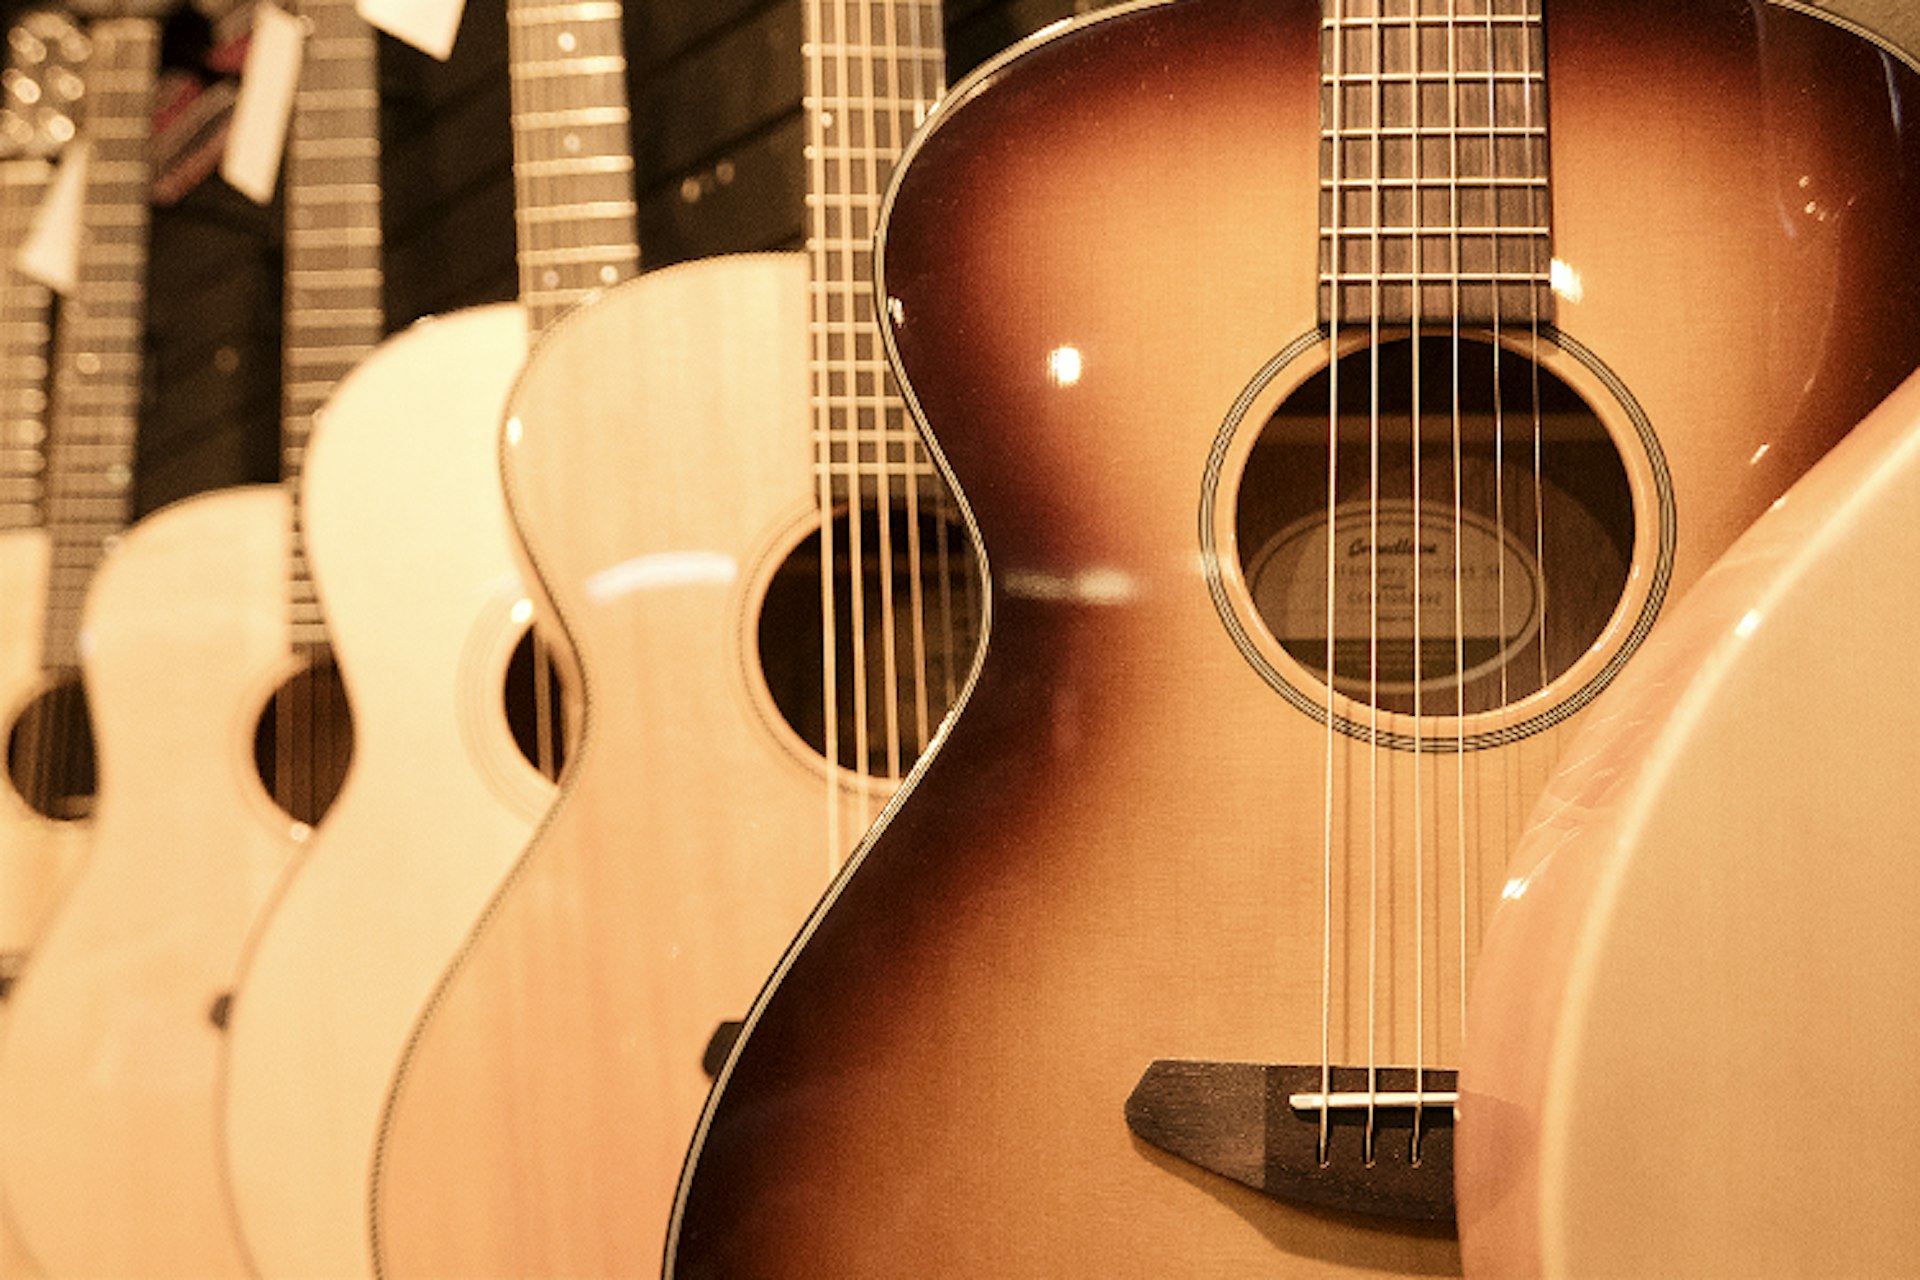 Acoustic guitars for sale at Corner Music. Image by Dora Whitaker / Lonely Planet